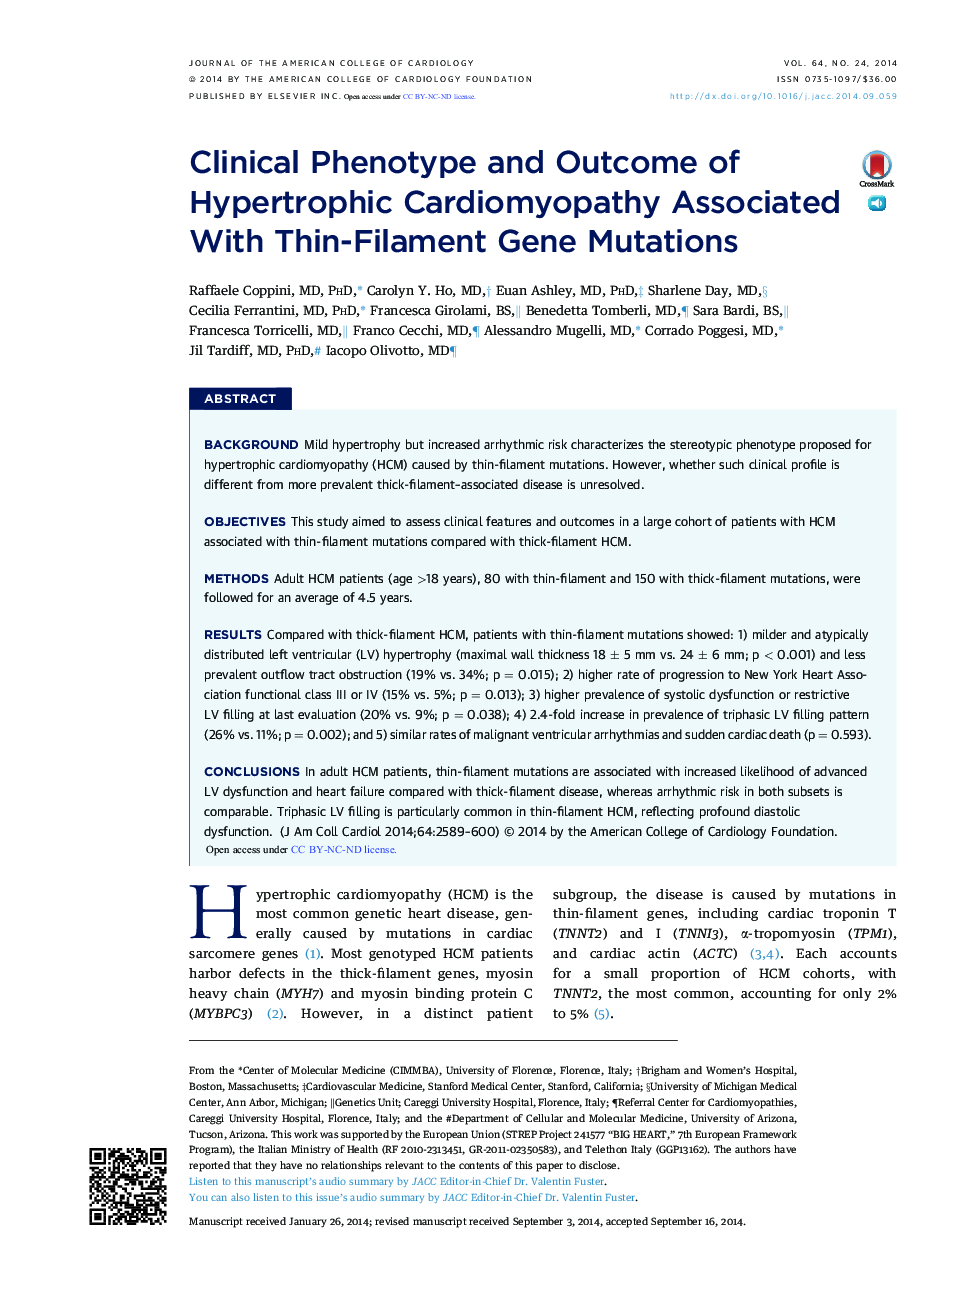 Clinical Phenotype and Outcome of Hypertrophic Cardiomyopathy Associated With Thin-Filament Gene Mutations